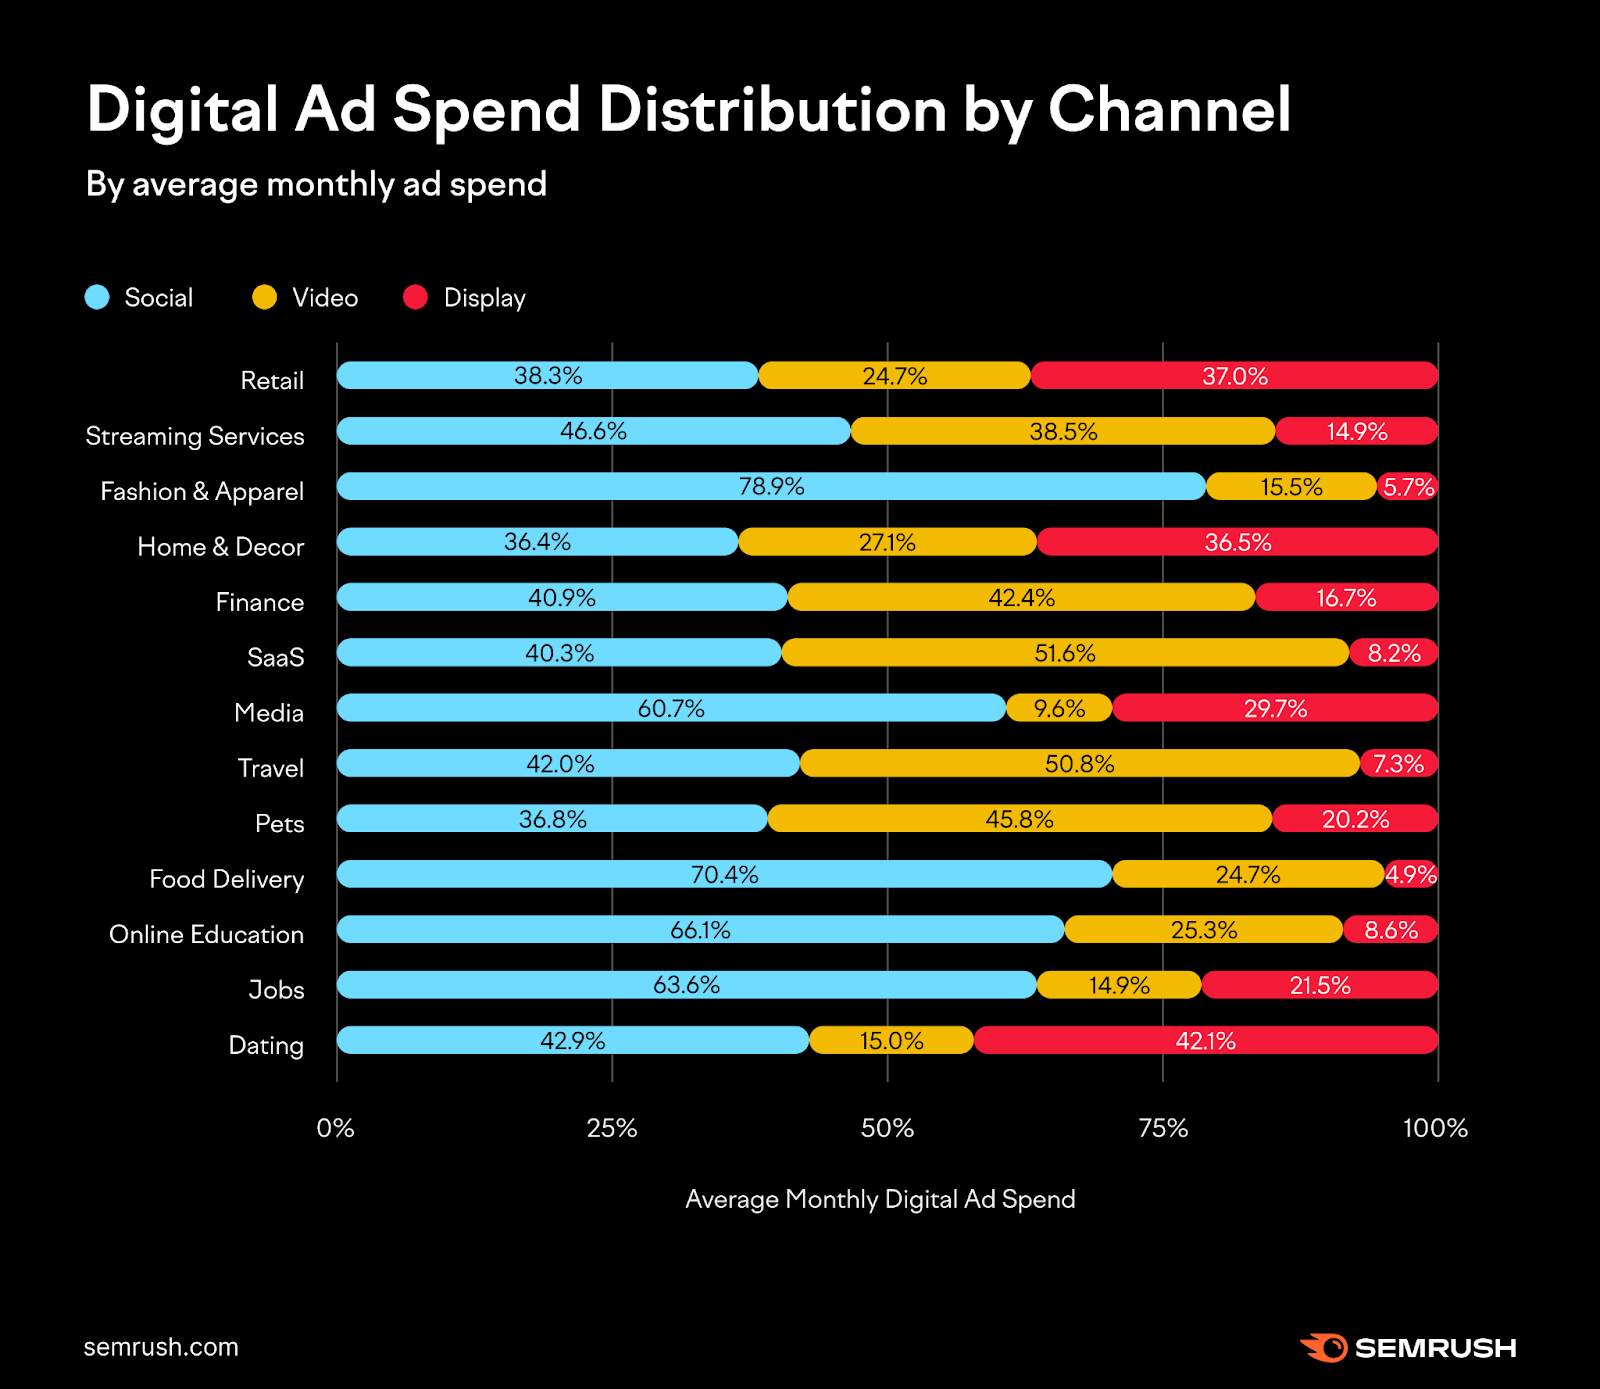 Digital ad spend distribution by channel